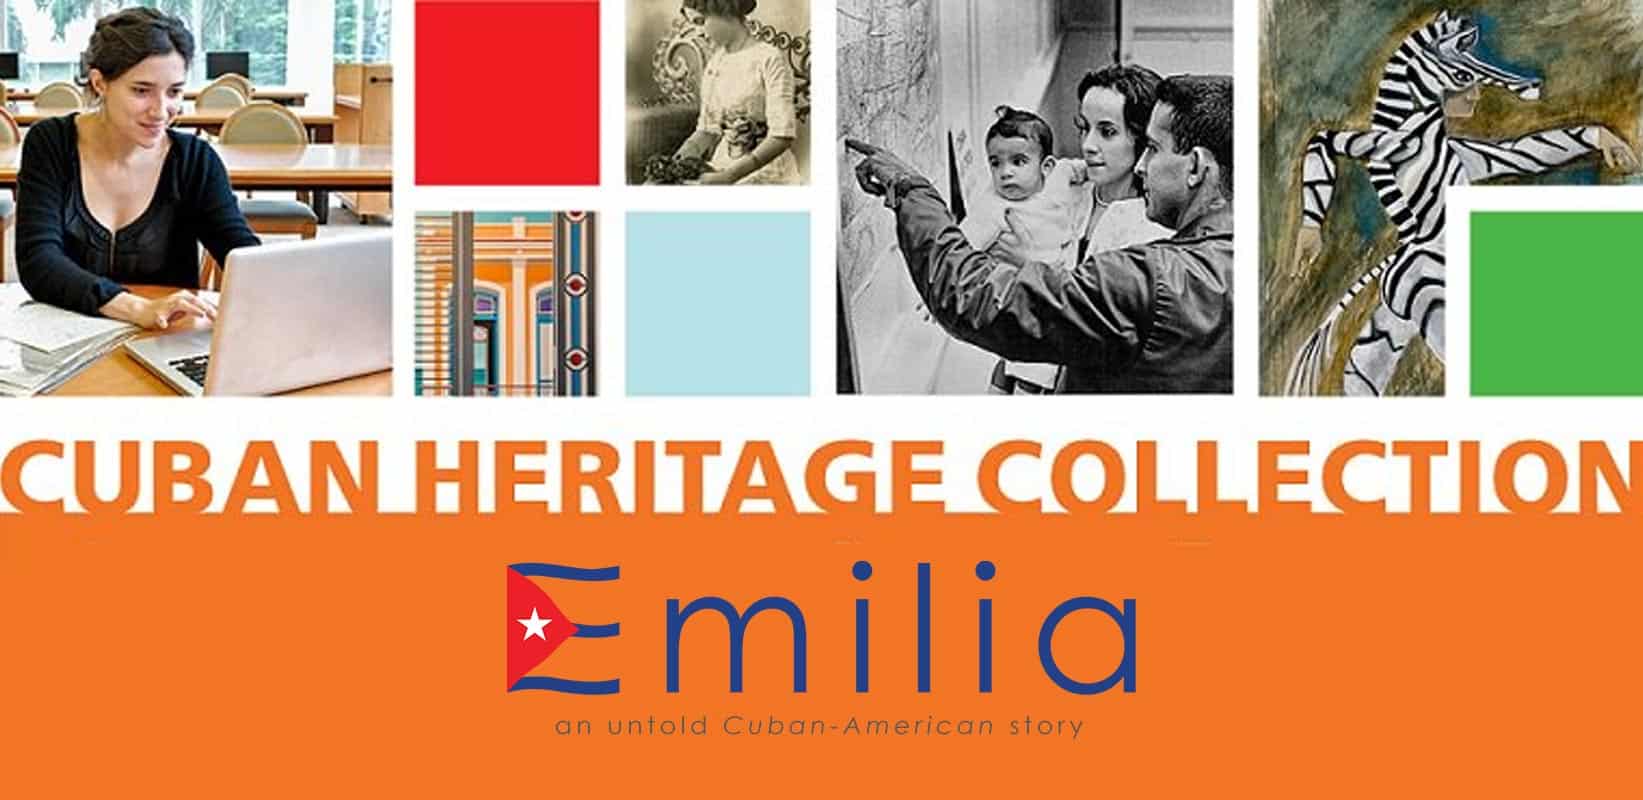 Emilia Documentary Launches the 2019 Film Series for the UM Libraries Cuban Heritage Collection